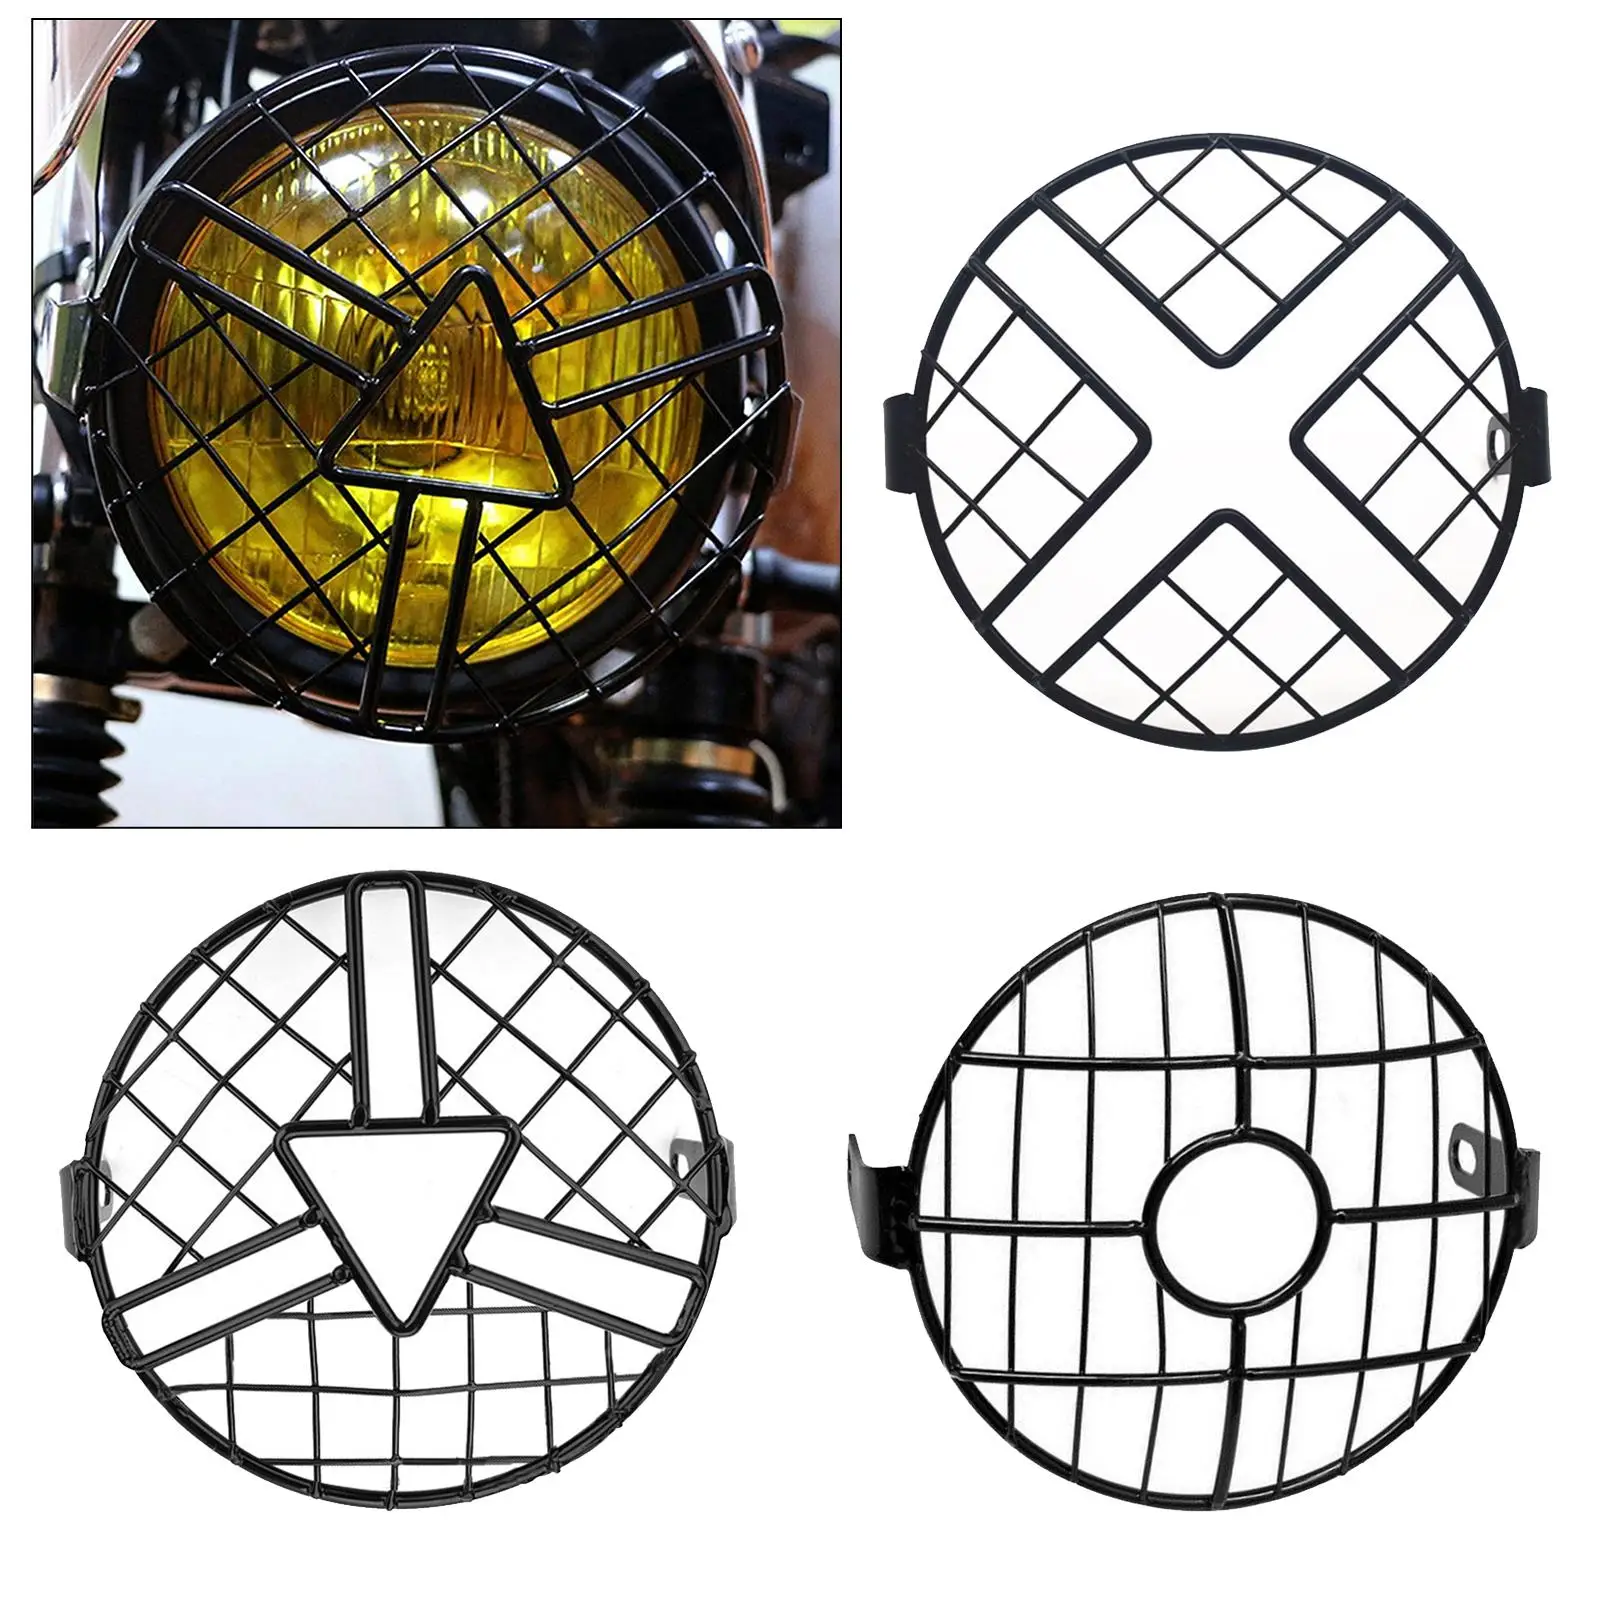 Universal 6.5 inch Motorcycle Headlight Grill Guard Iron Round Retro Headlamp Light Cover for Cafe Racer Cruiser Black